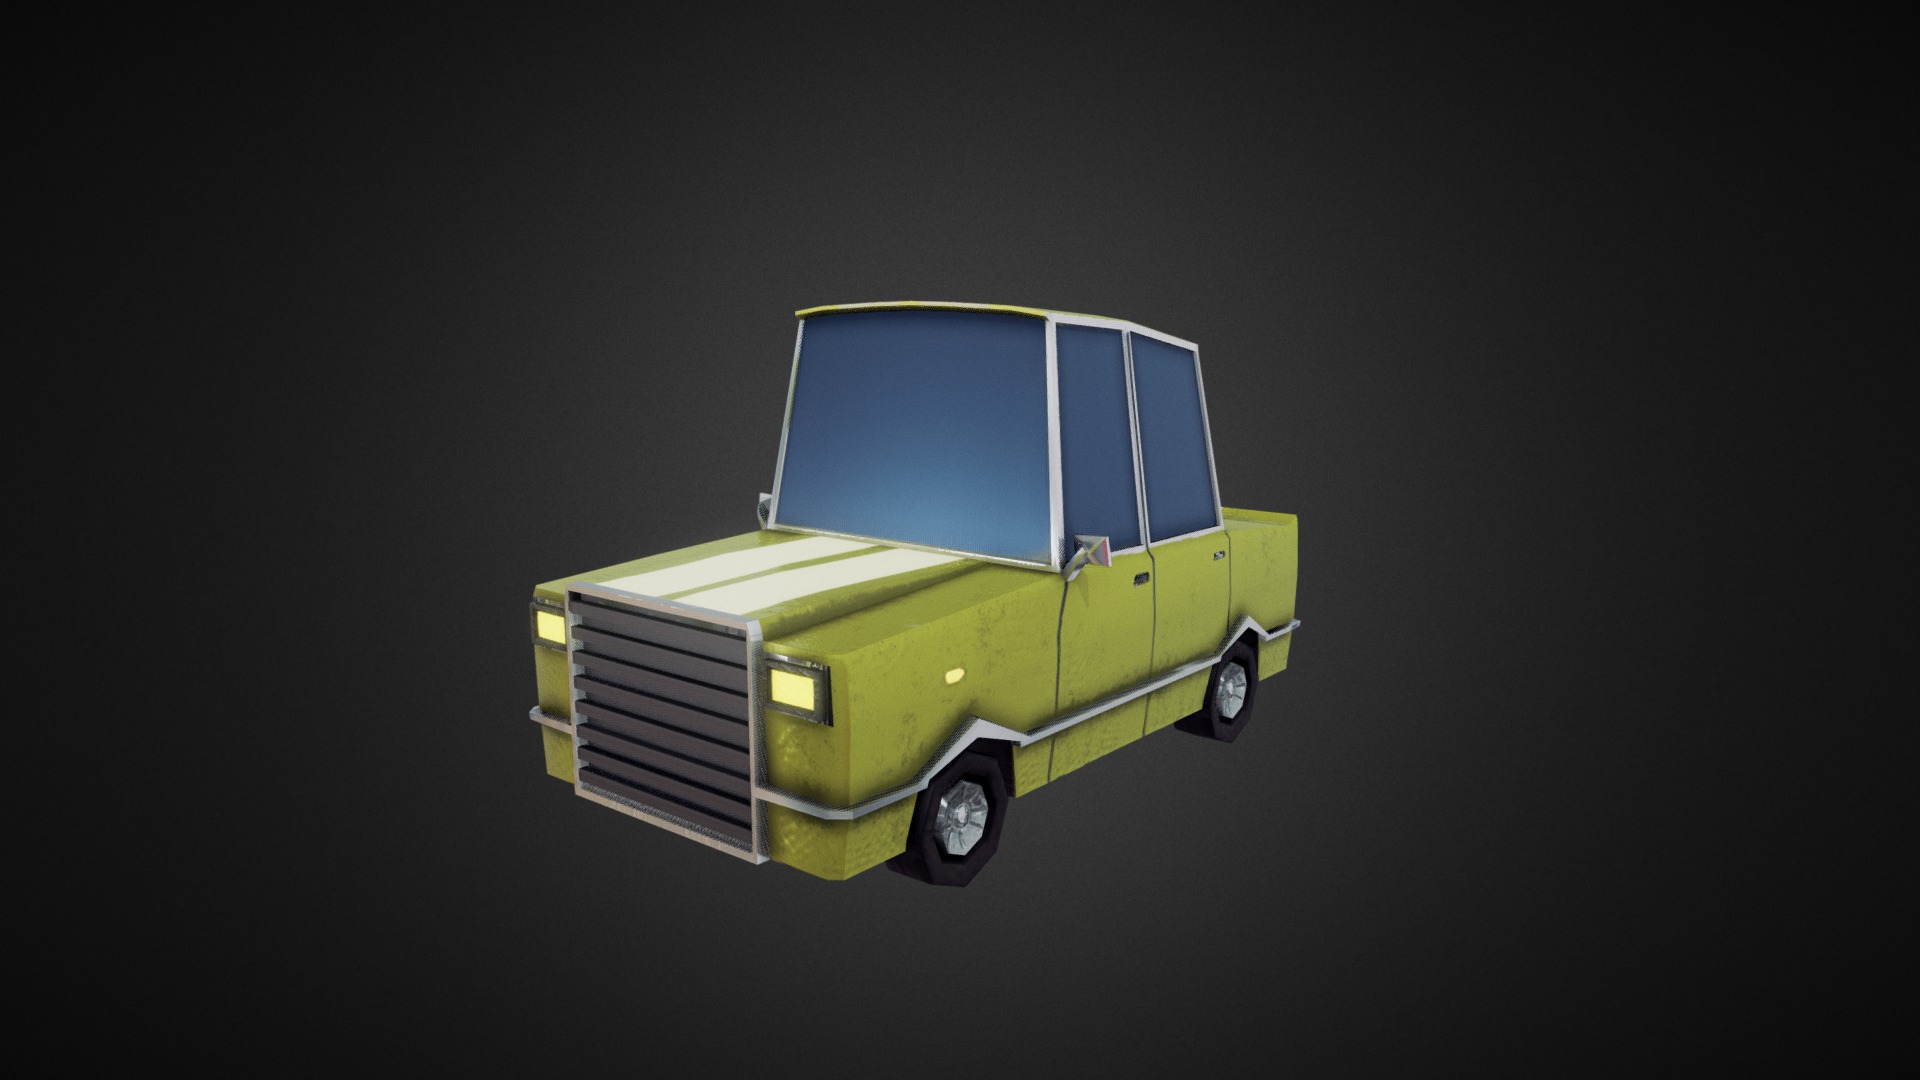 3D model Lowpoly Car - This is a 3D model of the Lowpoly Car. The 3D model is about a small green car.